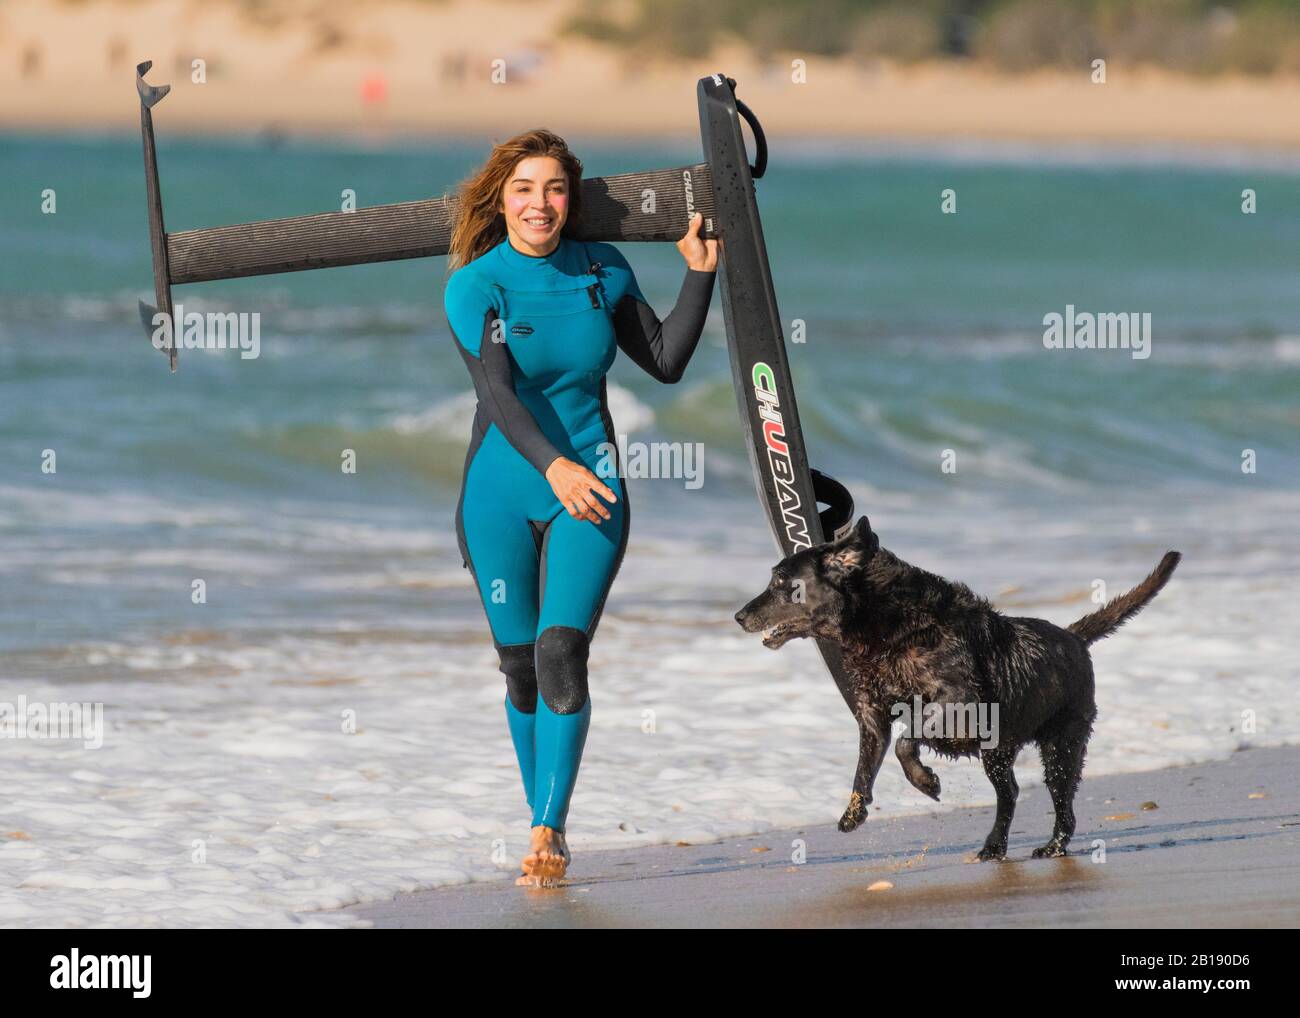 Woman with a kitesurfing racing foil board. Stock Photo